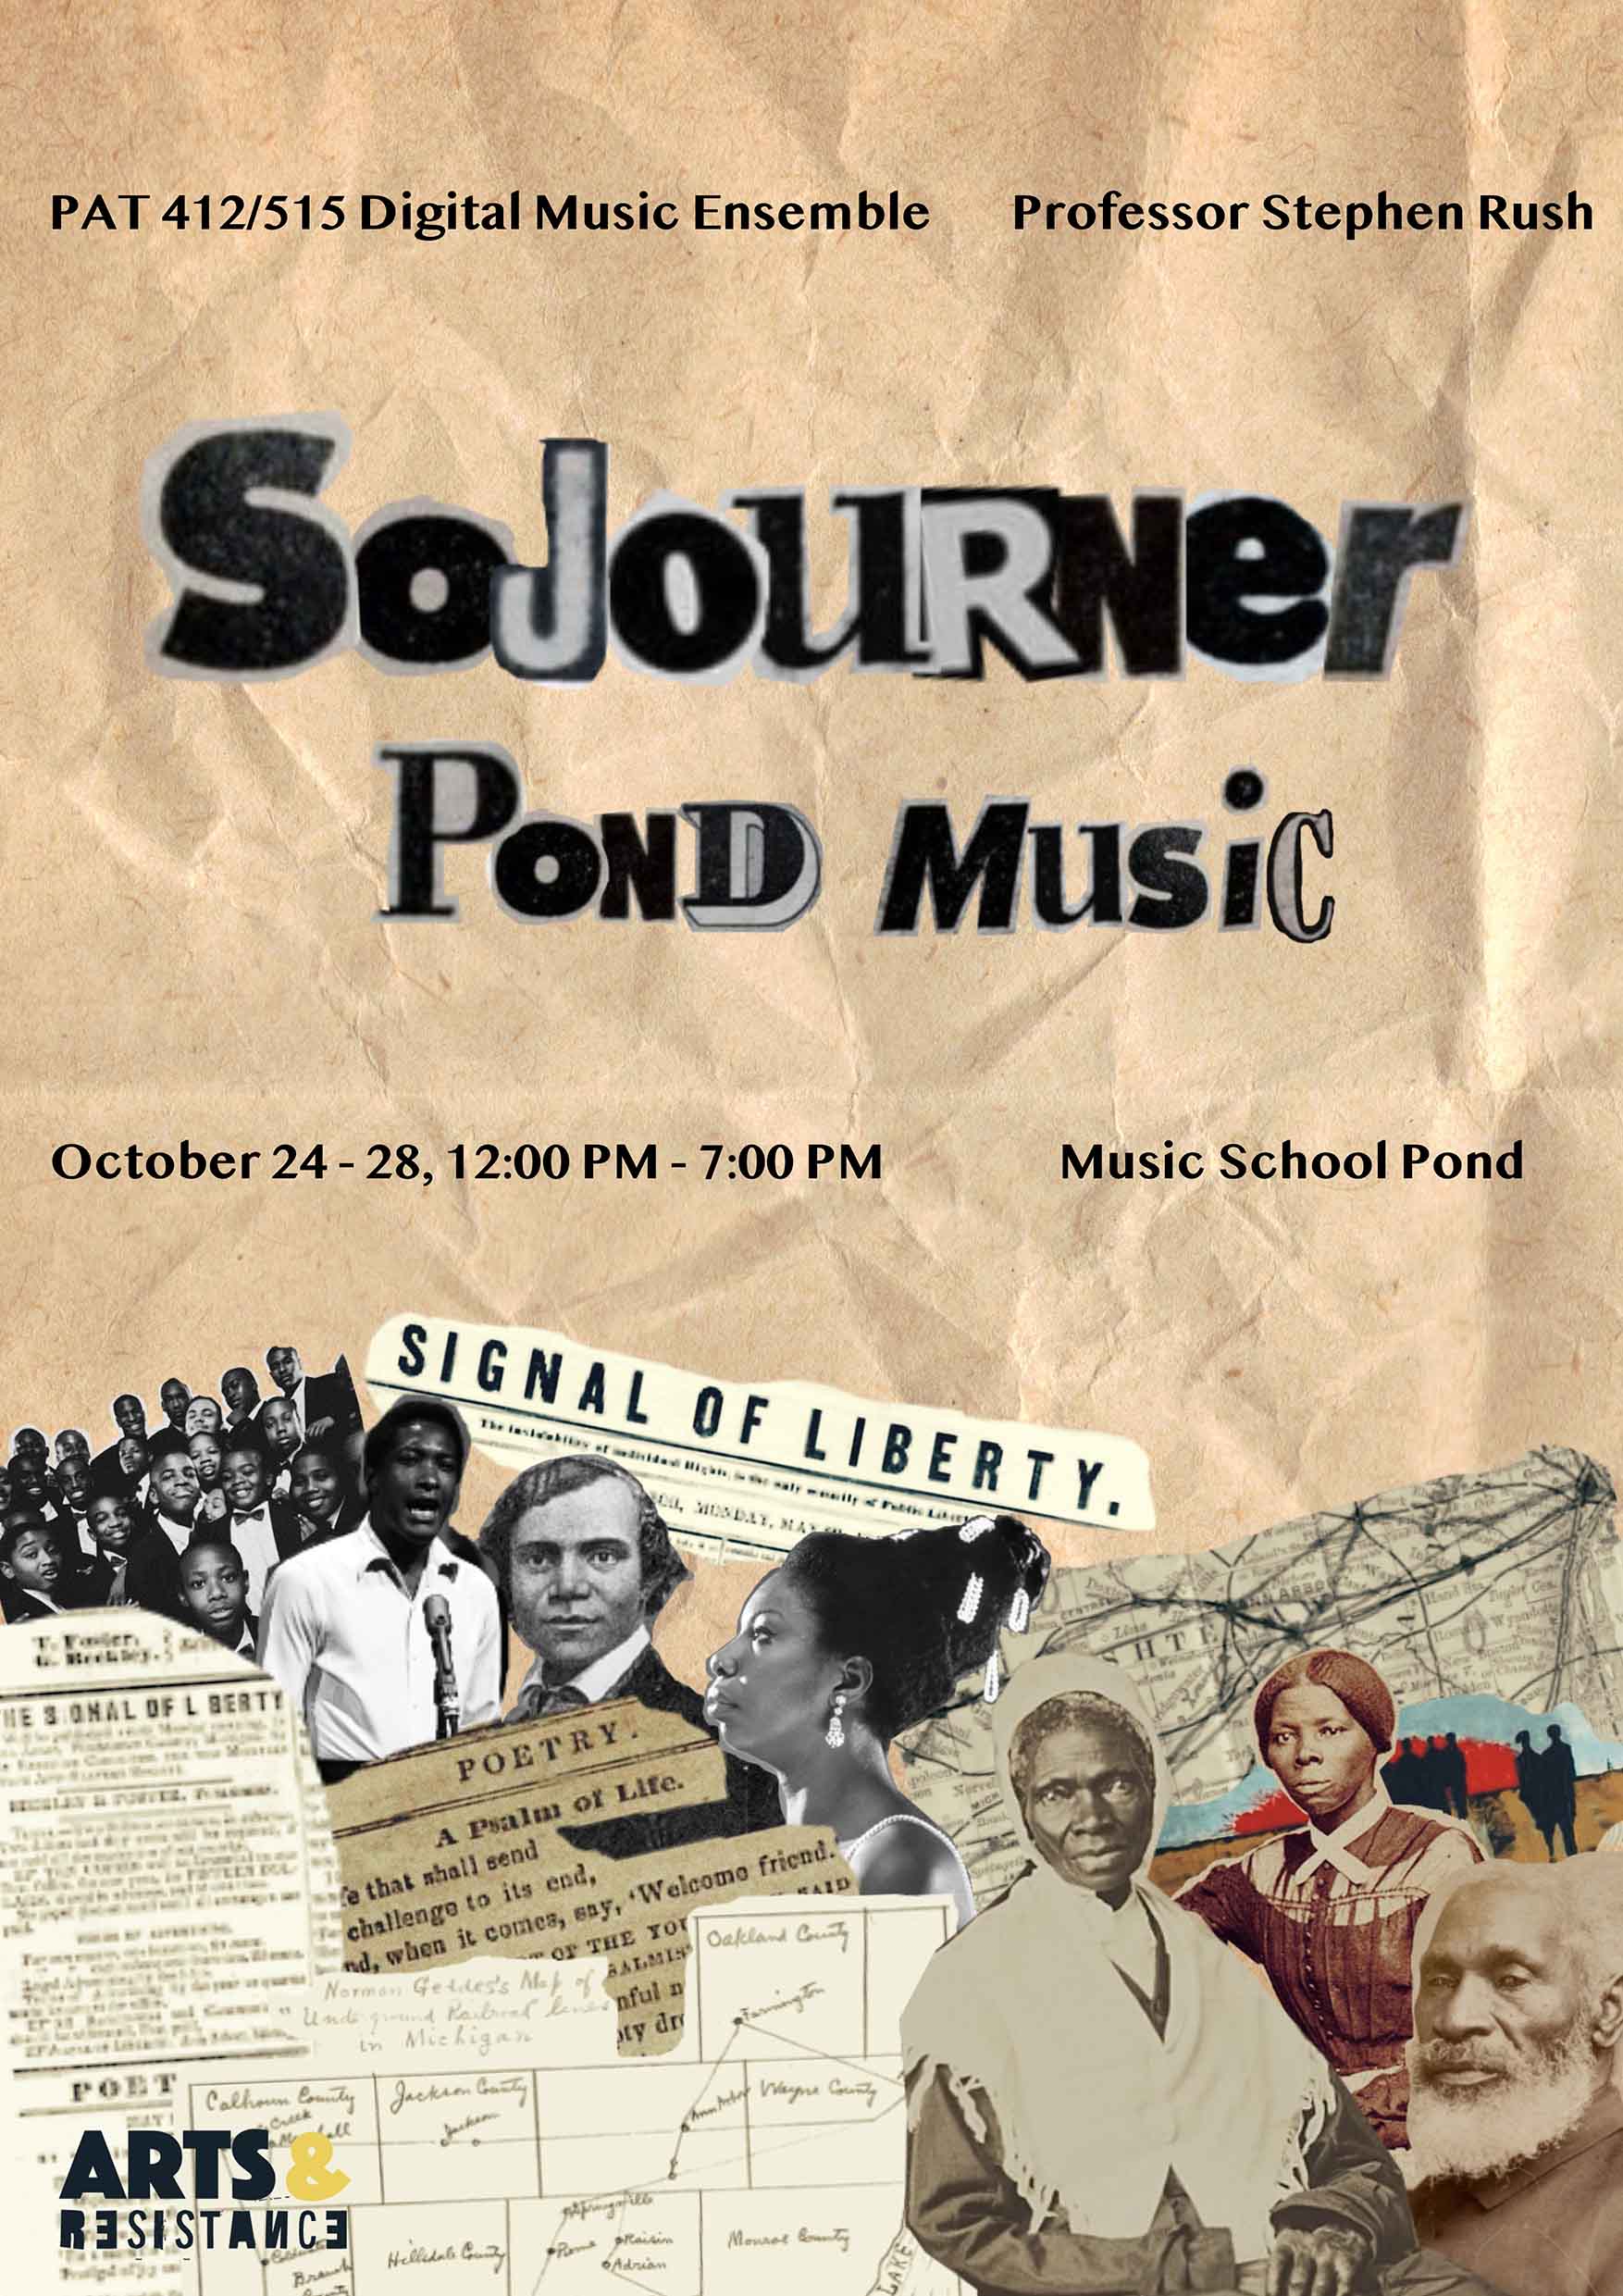 Poster for "Sojourner Pond Music" with event details; clipped images of historical figures and documents relating to Liberty